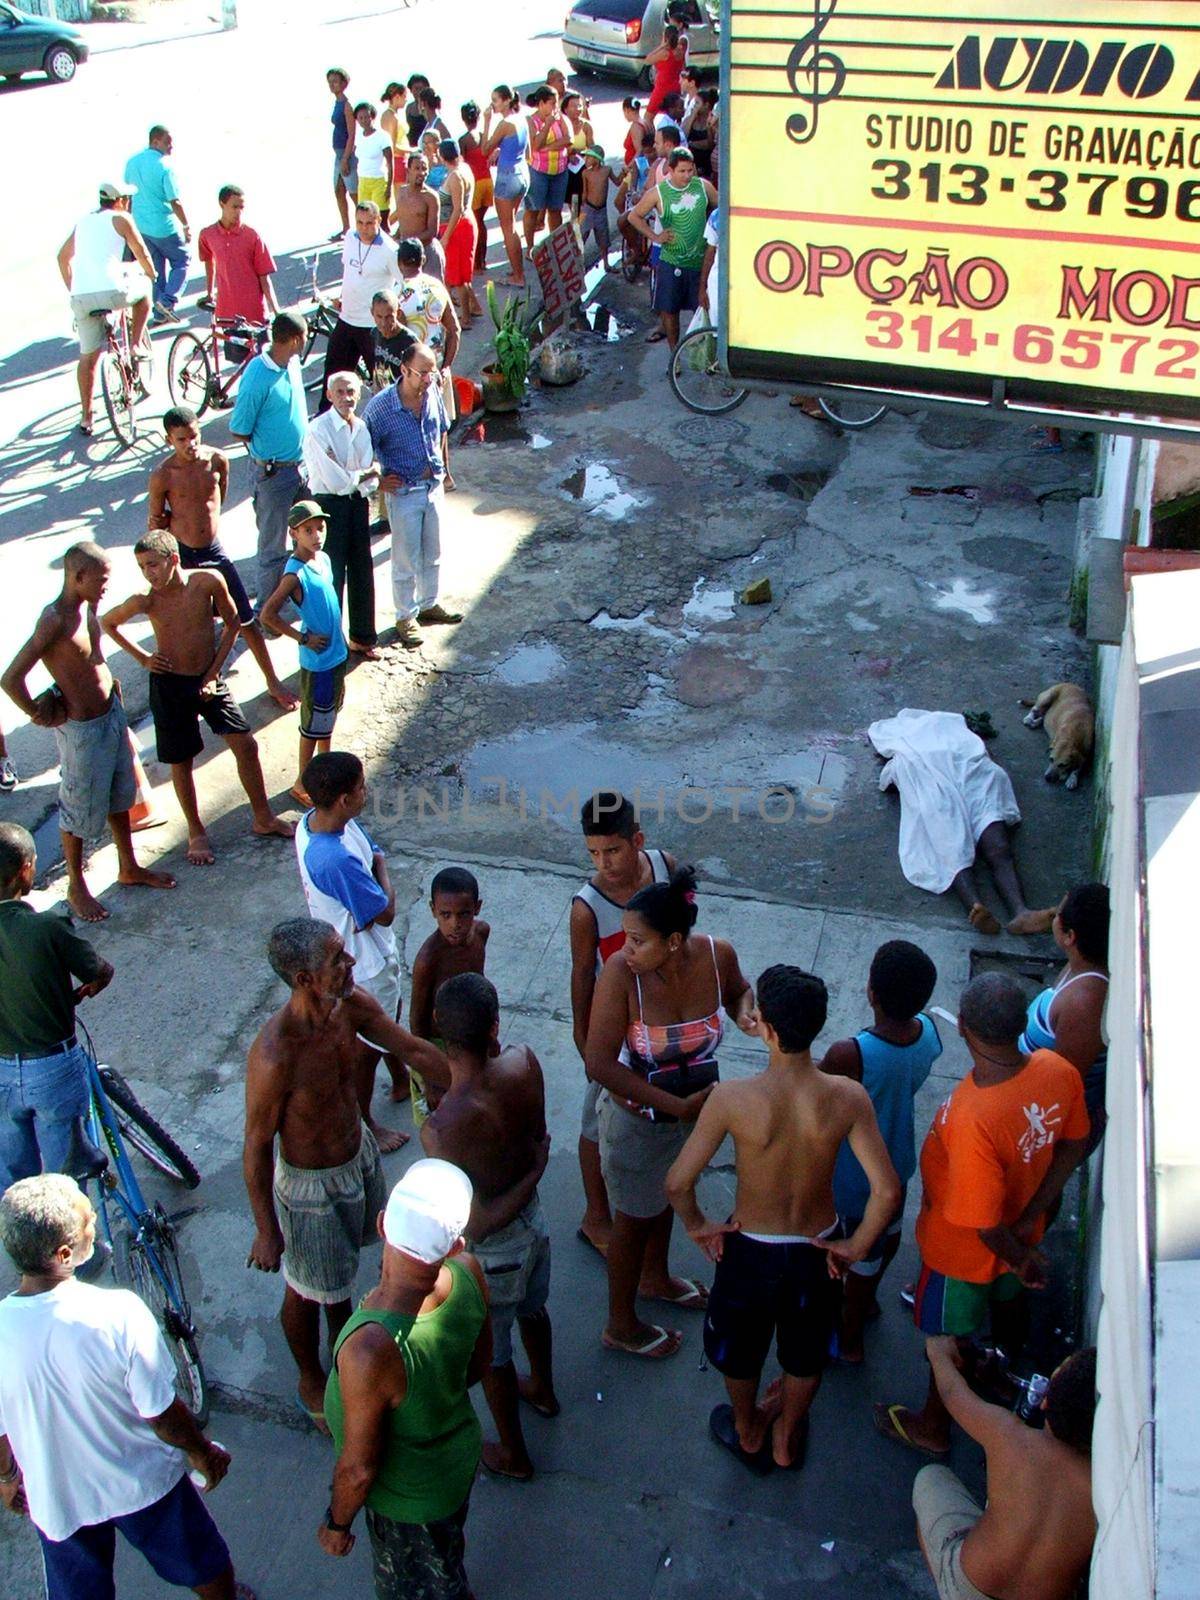 man murdered in the street in Salvador. by joasouza